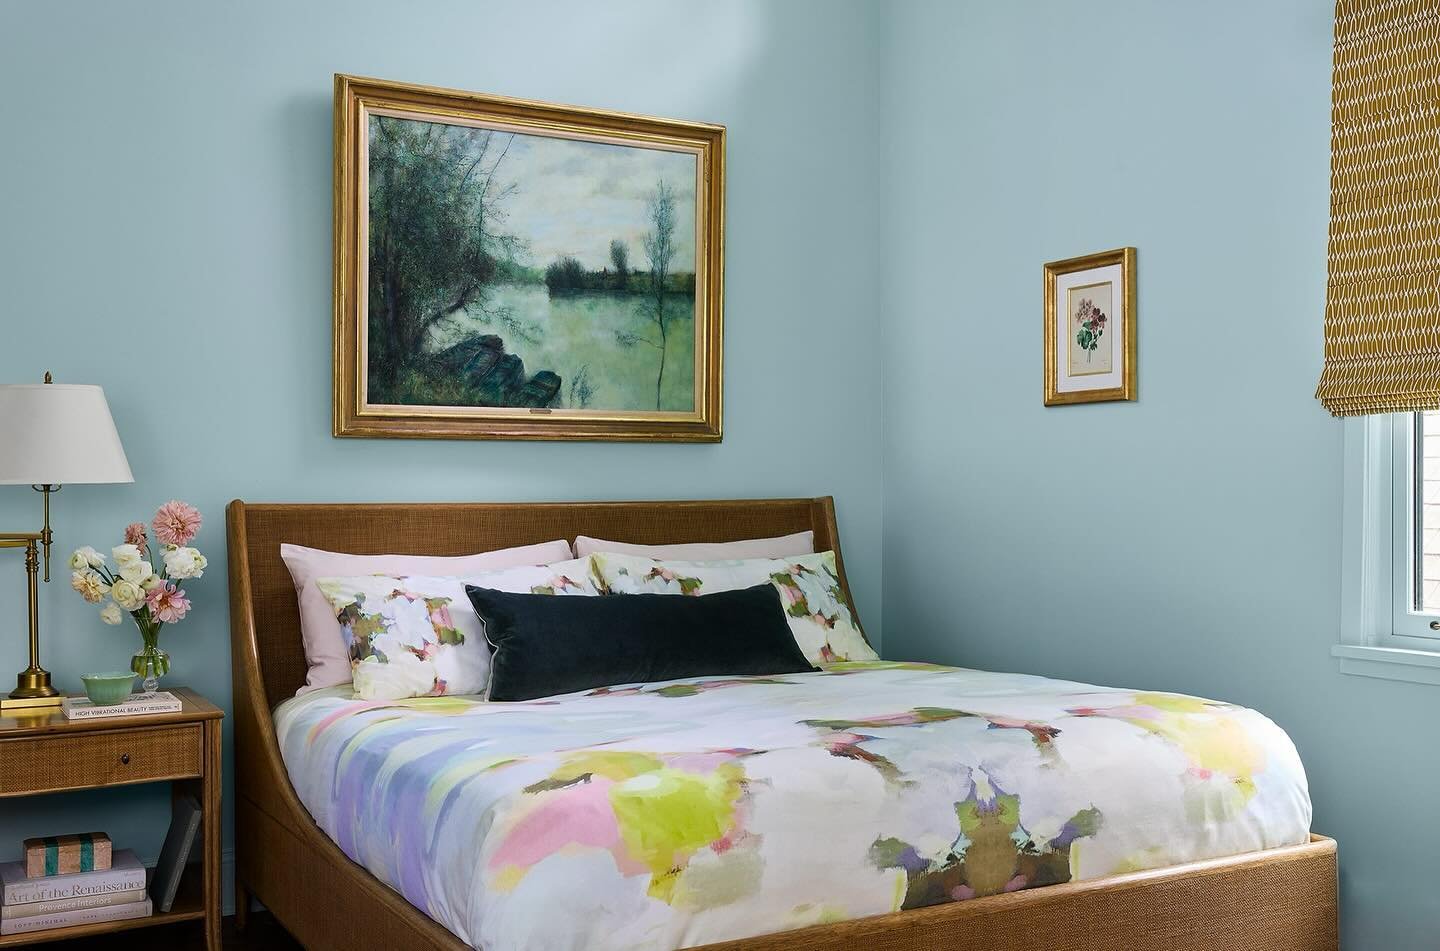 Mondays feel like they should be nap days, no? This is the primary bedroom from our #BotanicalBeauty project. Our client had the gorgeous vintage bedroom set and art, but we gave the room a fresh coat of paint, new bedding and window treatments.  Thi